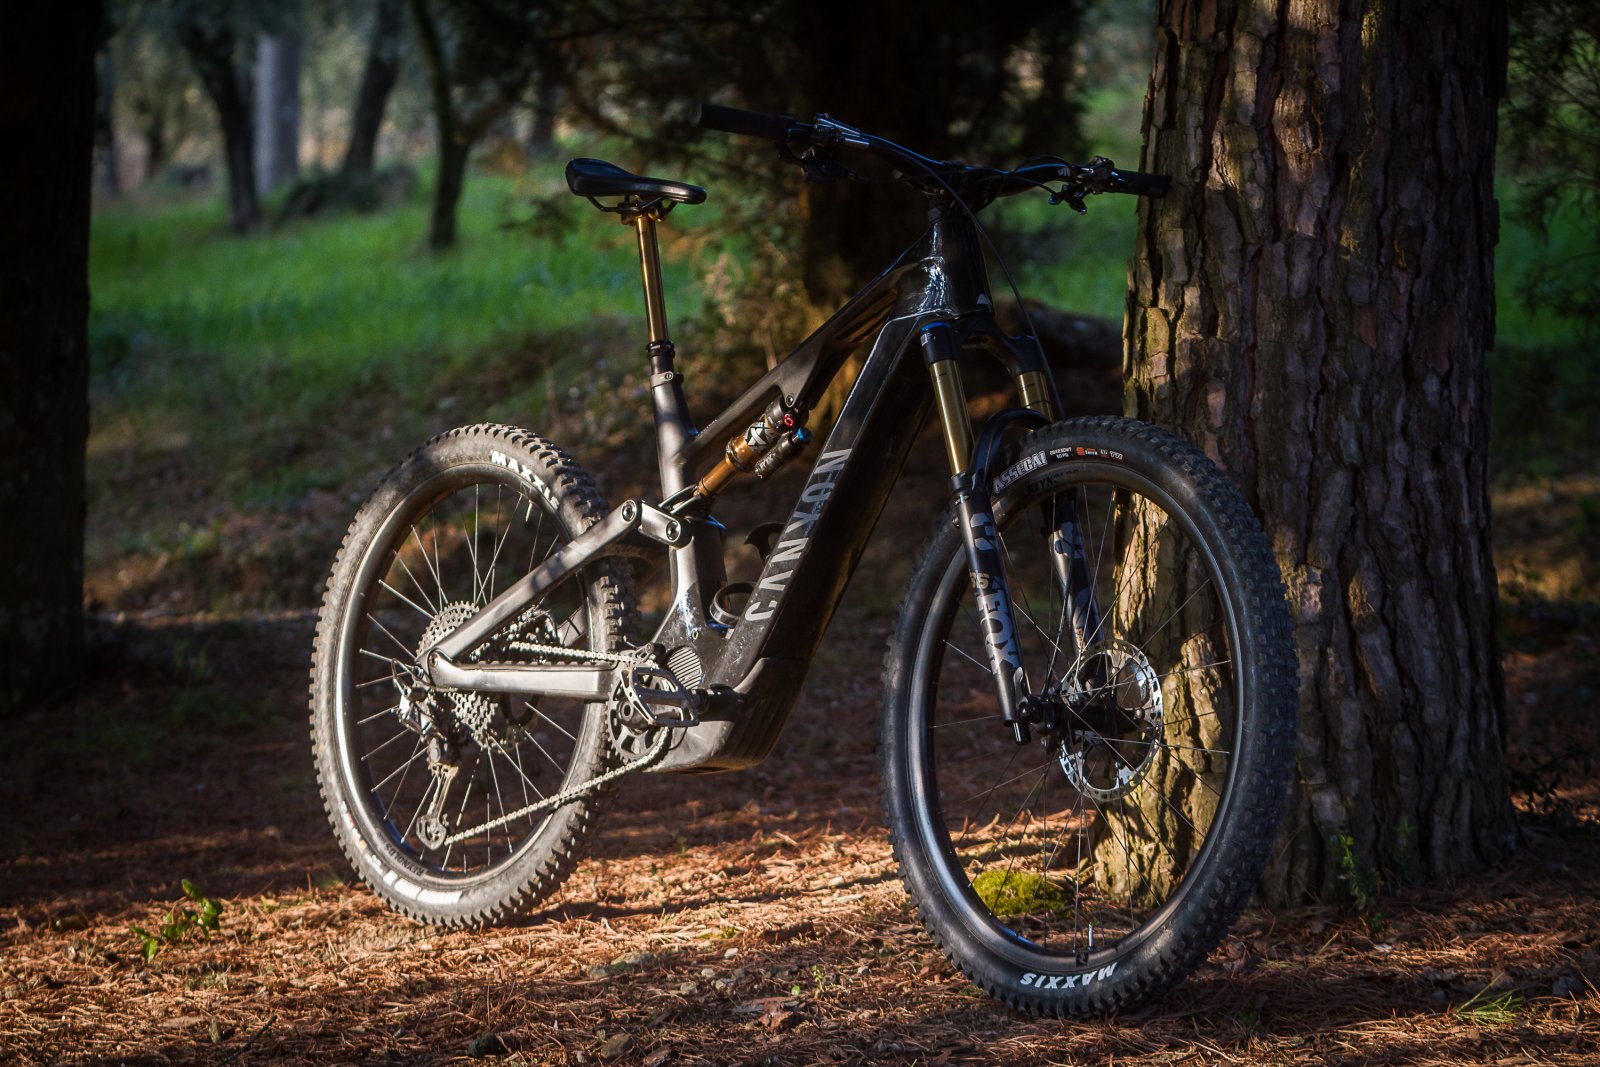 Review - New Canyon Spectral : ON CFR - 900 wh of PWR! | EMTB Forums